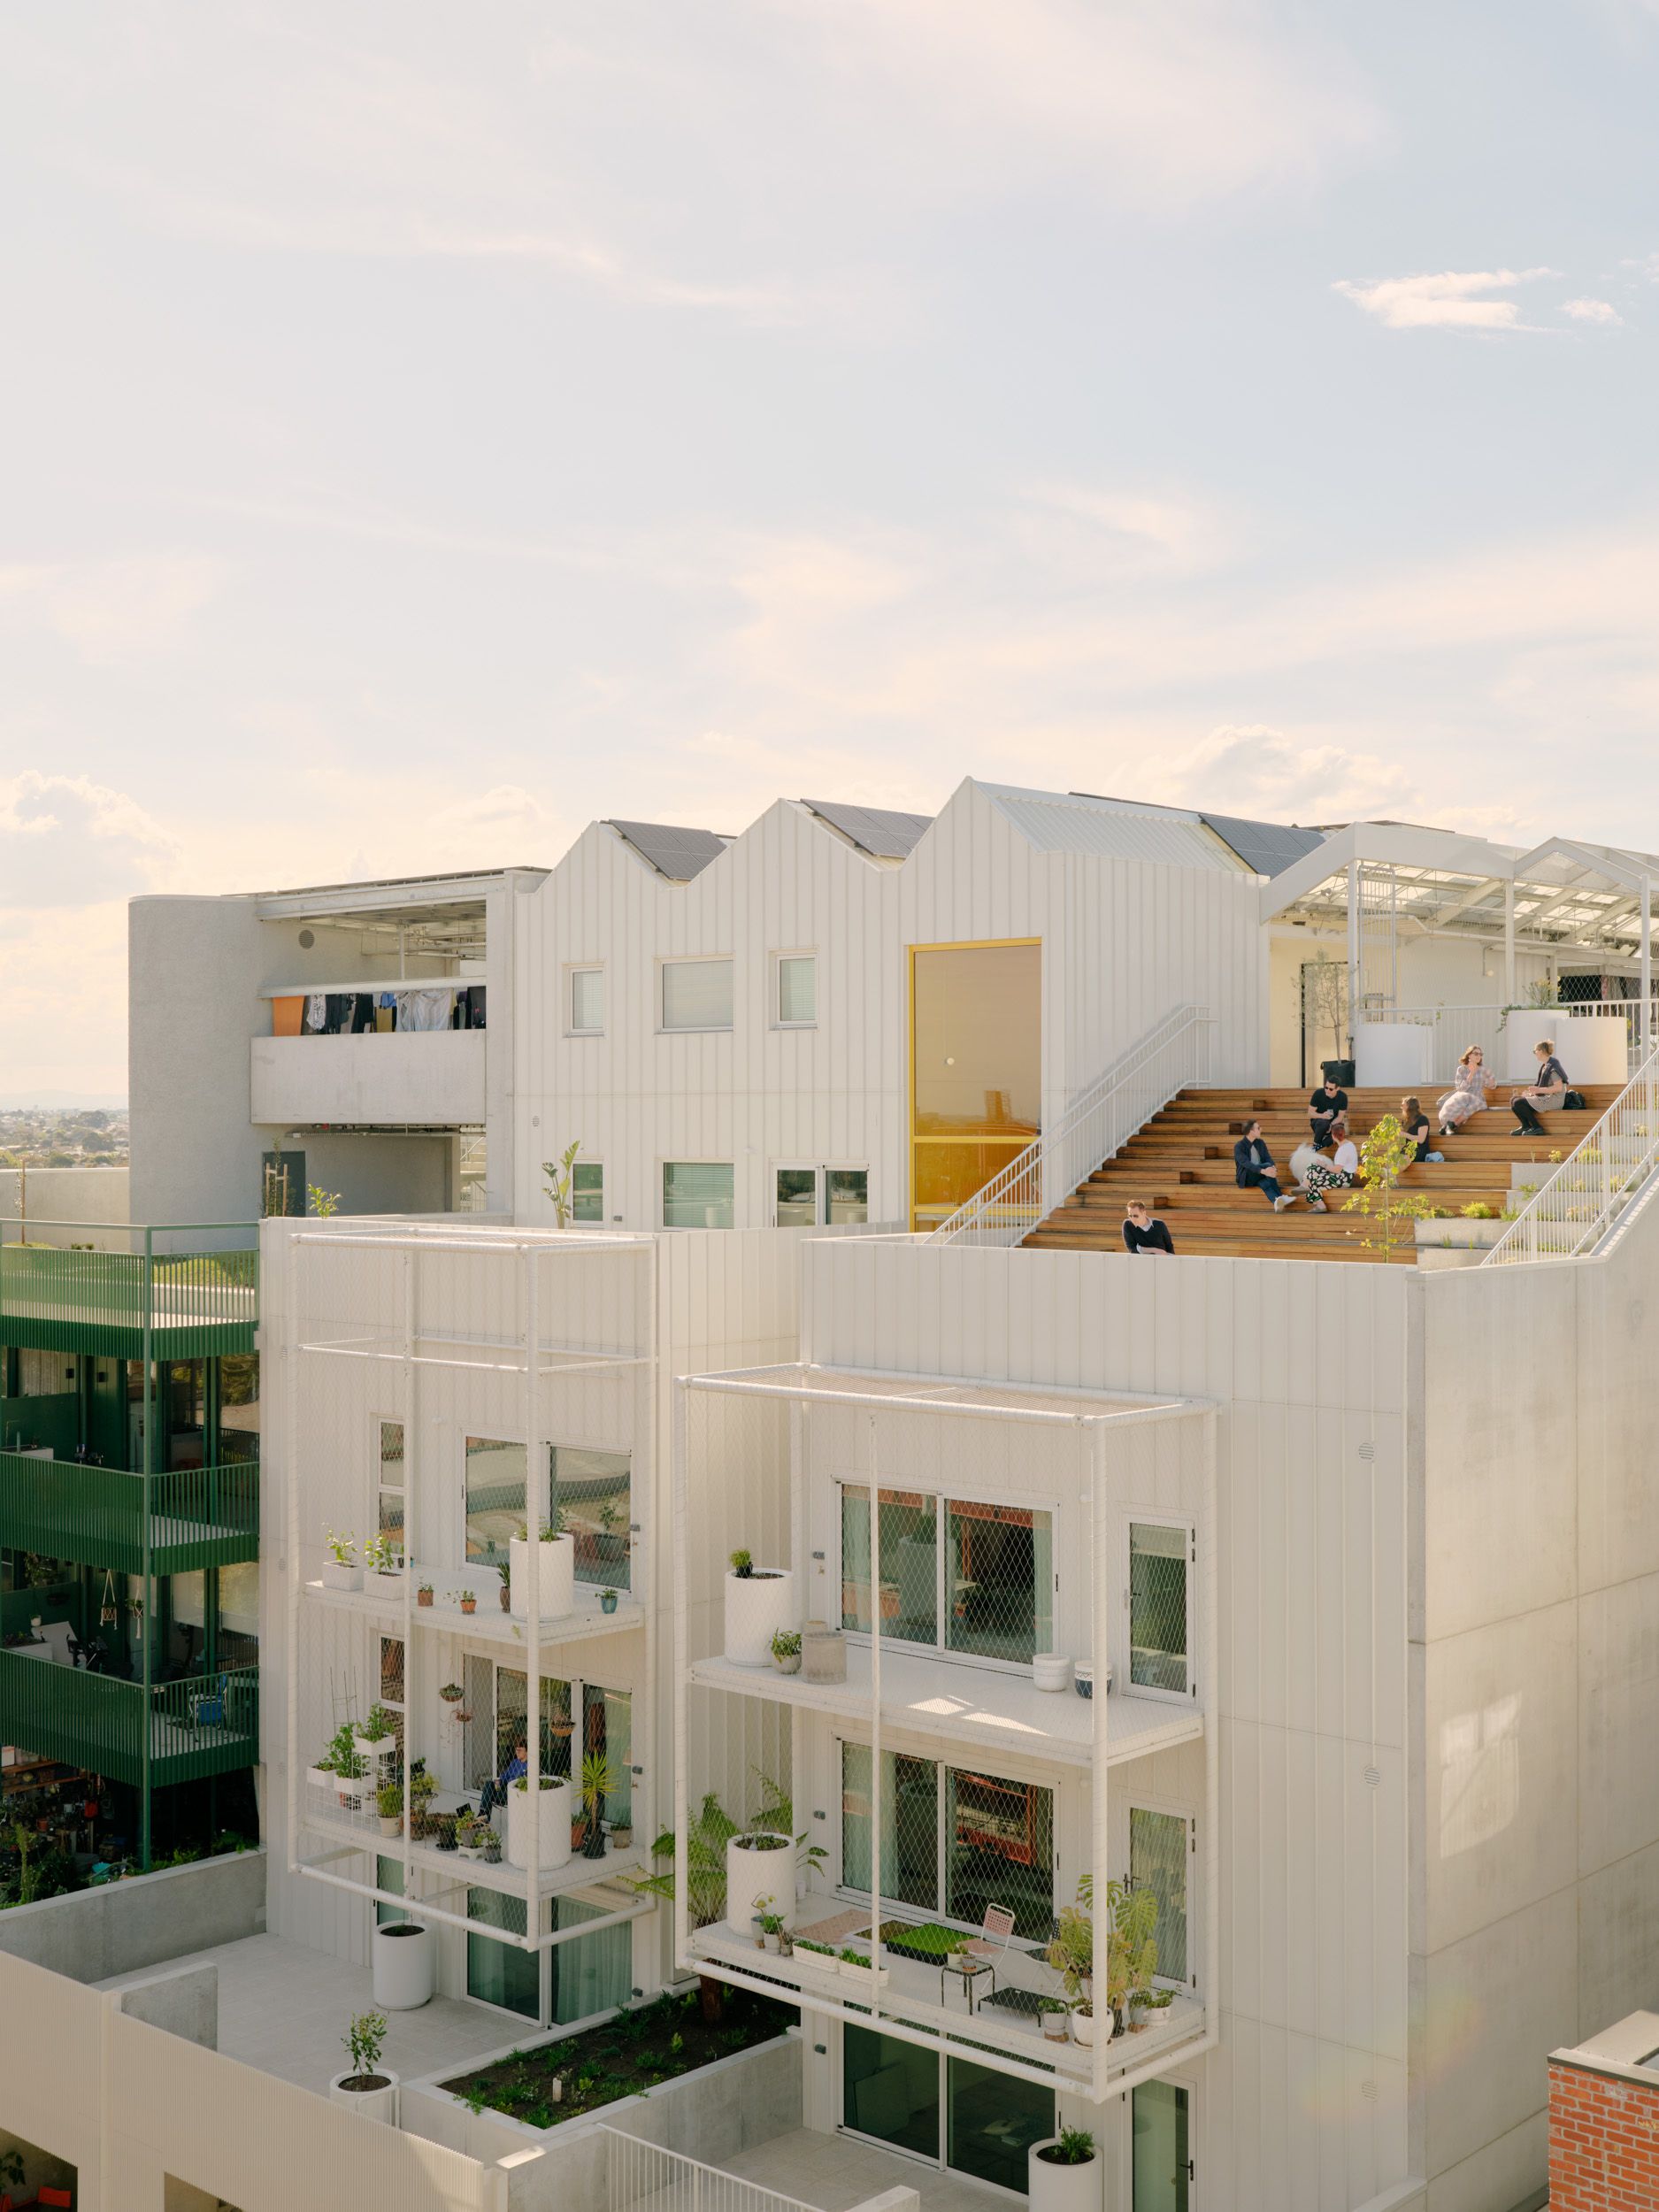 Nightingale ParkLife By Austin Maynard Architects. Birds eyes view of Parklife apartments crisp white facade and yellow accents. 